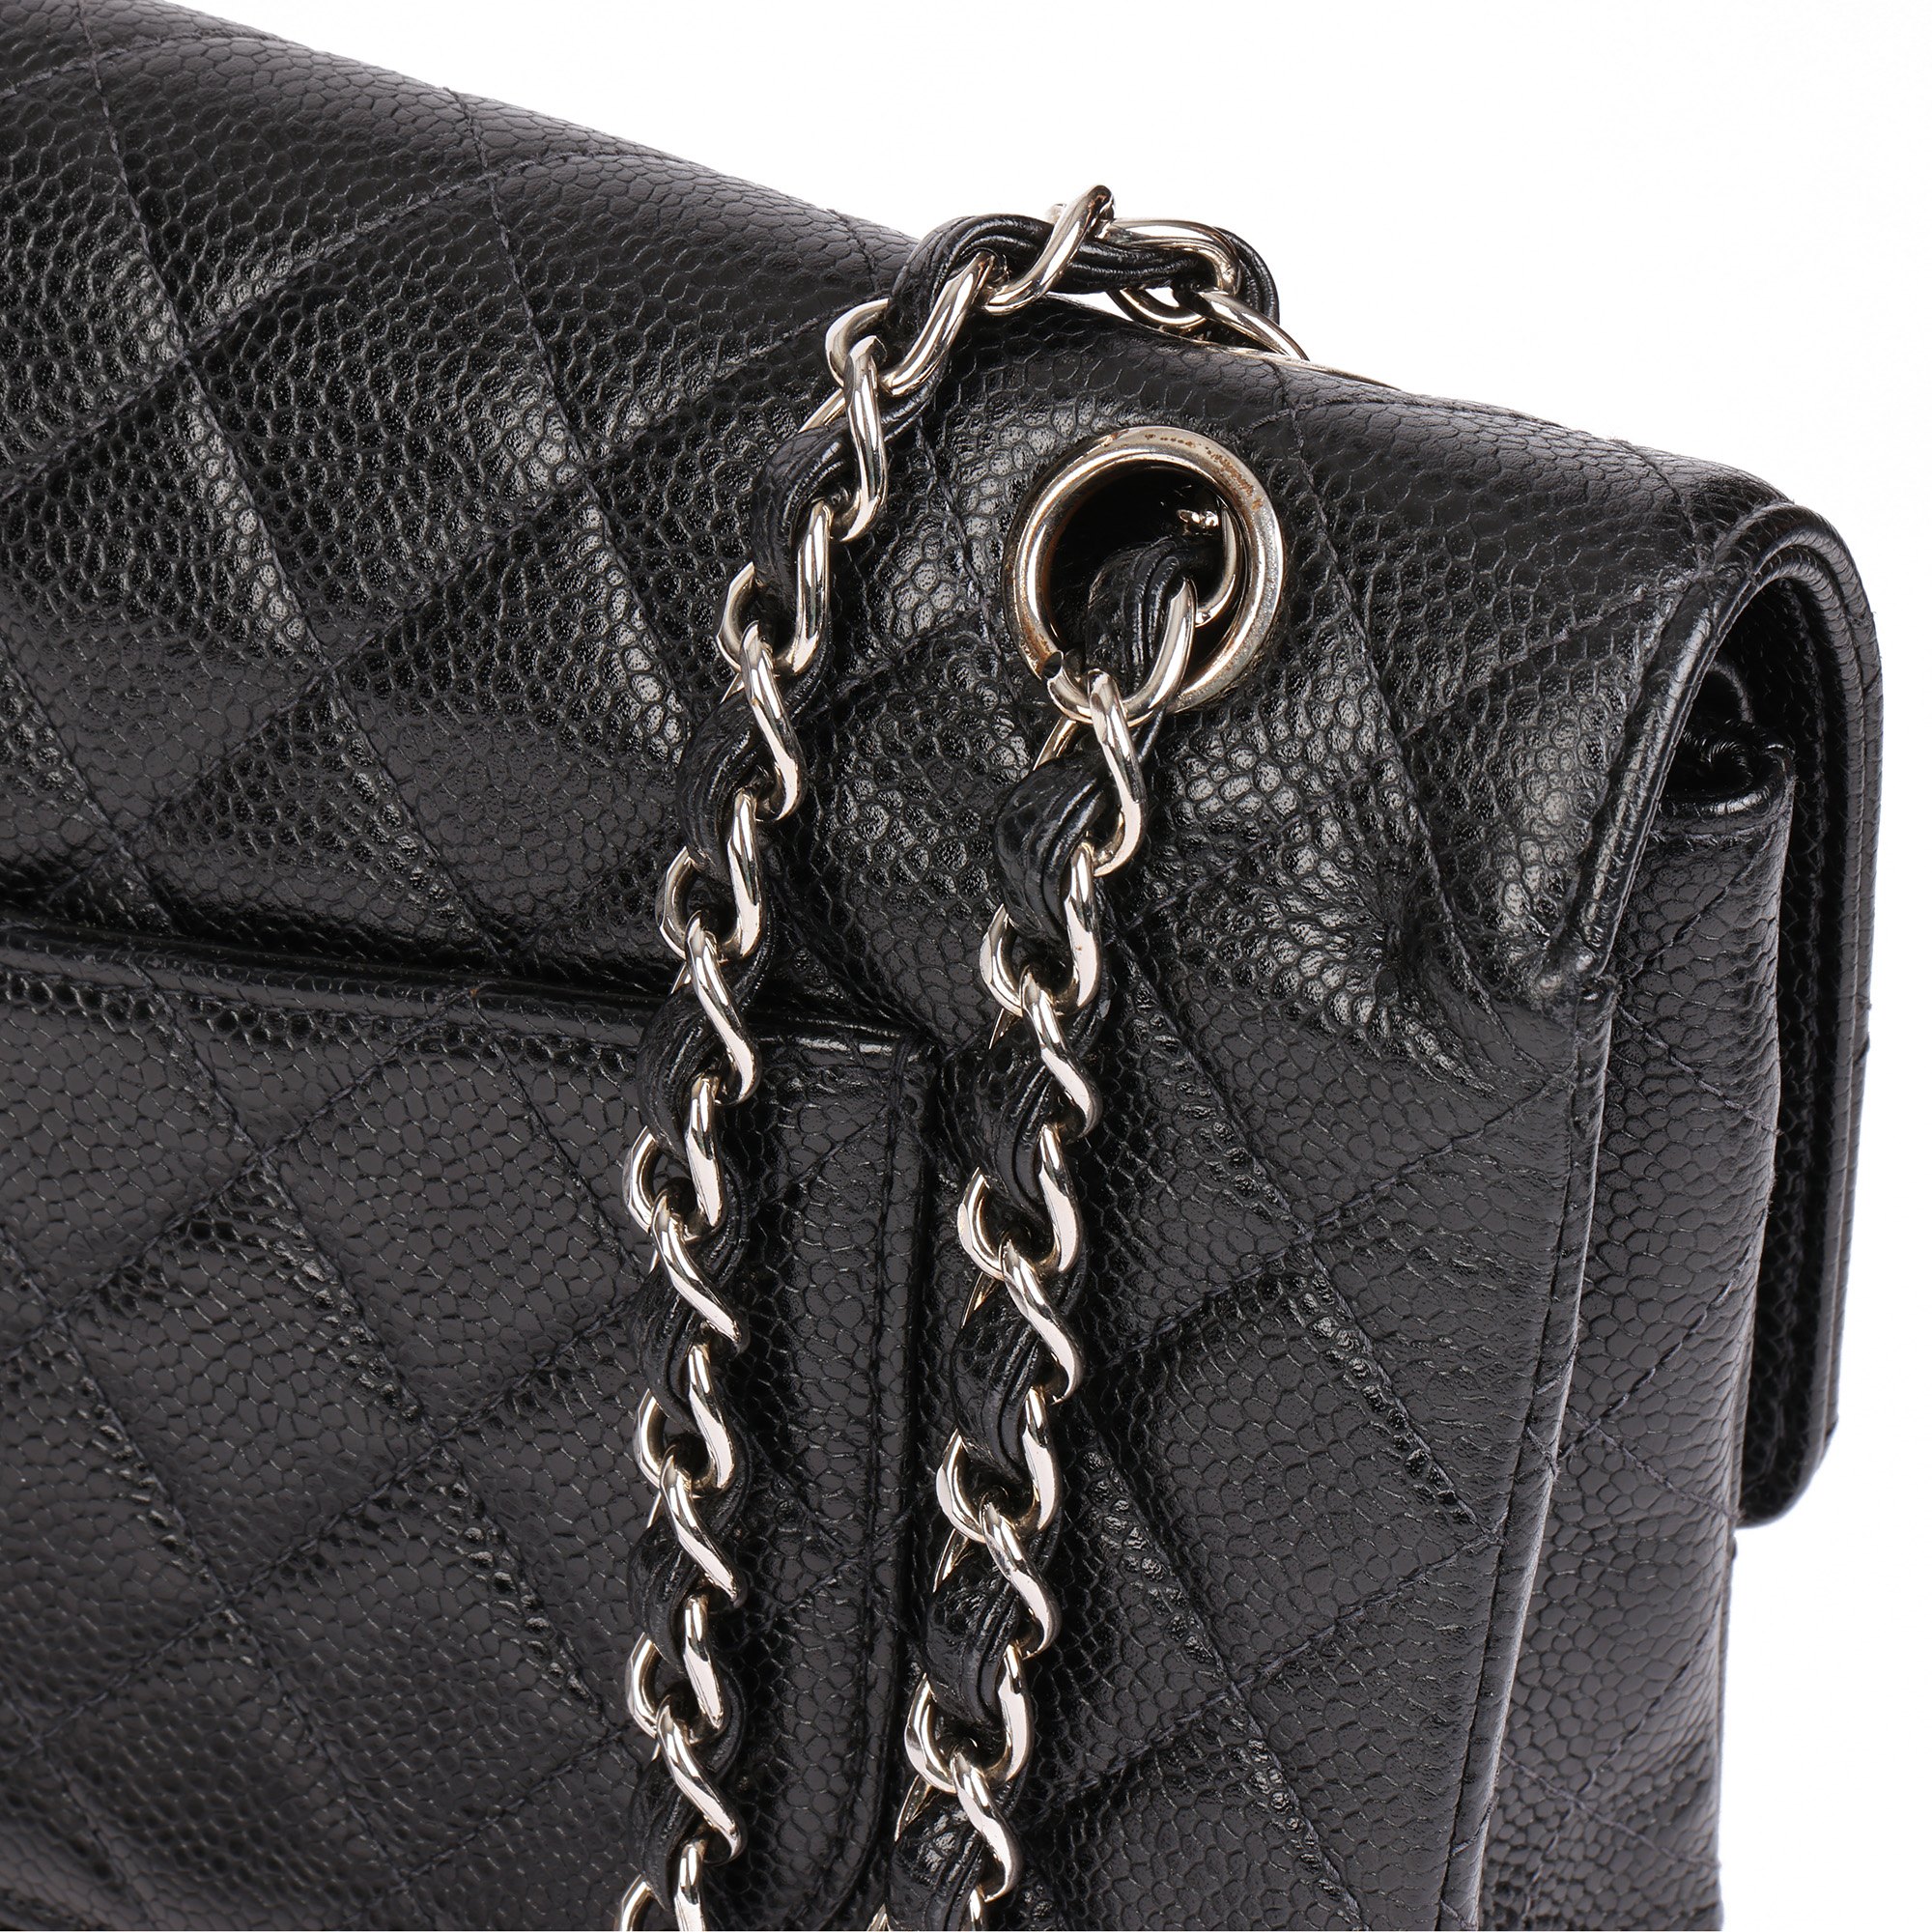 Chanel Black Quilted Caviar Leather Vintage Medium Classic Double Flap Bag